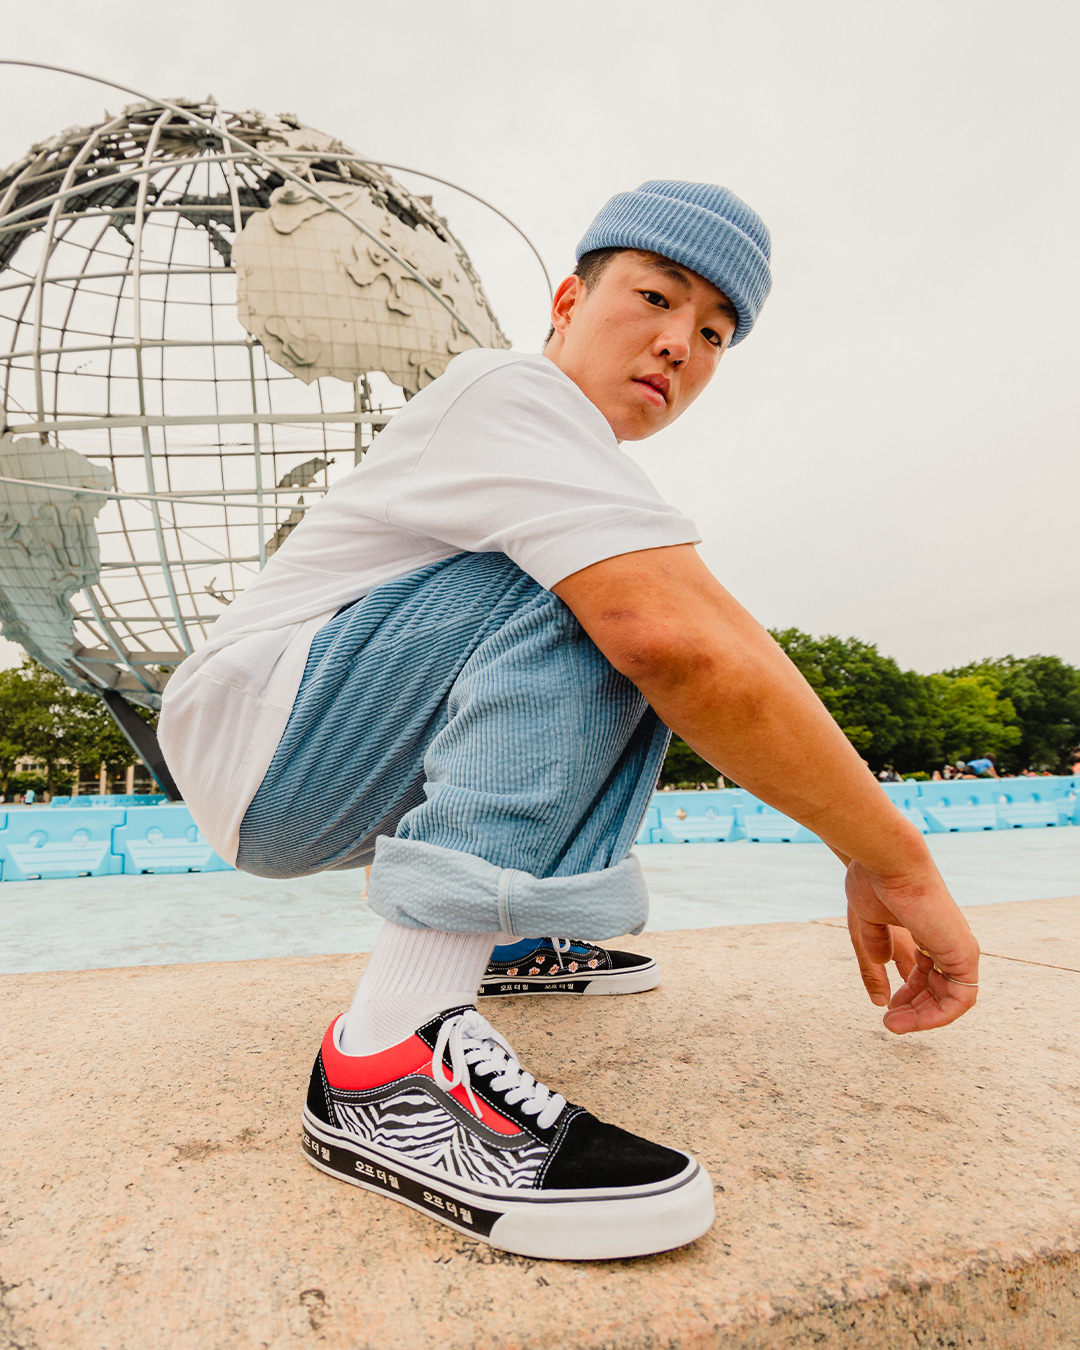 Locker on Twitter: world is yours 🌏 #Vans 'Korean Typography' Sk8-Hi features pops of colors and mixed graphics! Grab a online and in select stores: https://t.co/7ciKvLJPRu https://t.co/bzyb4wvayb" /